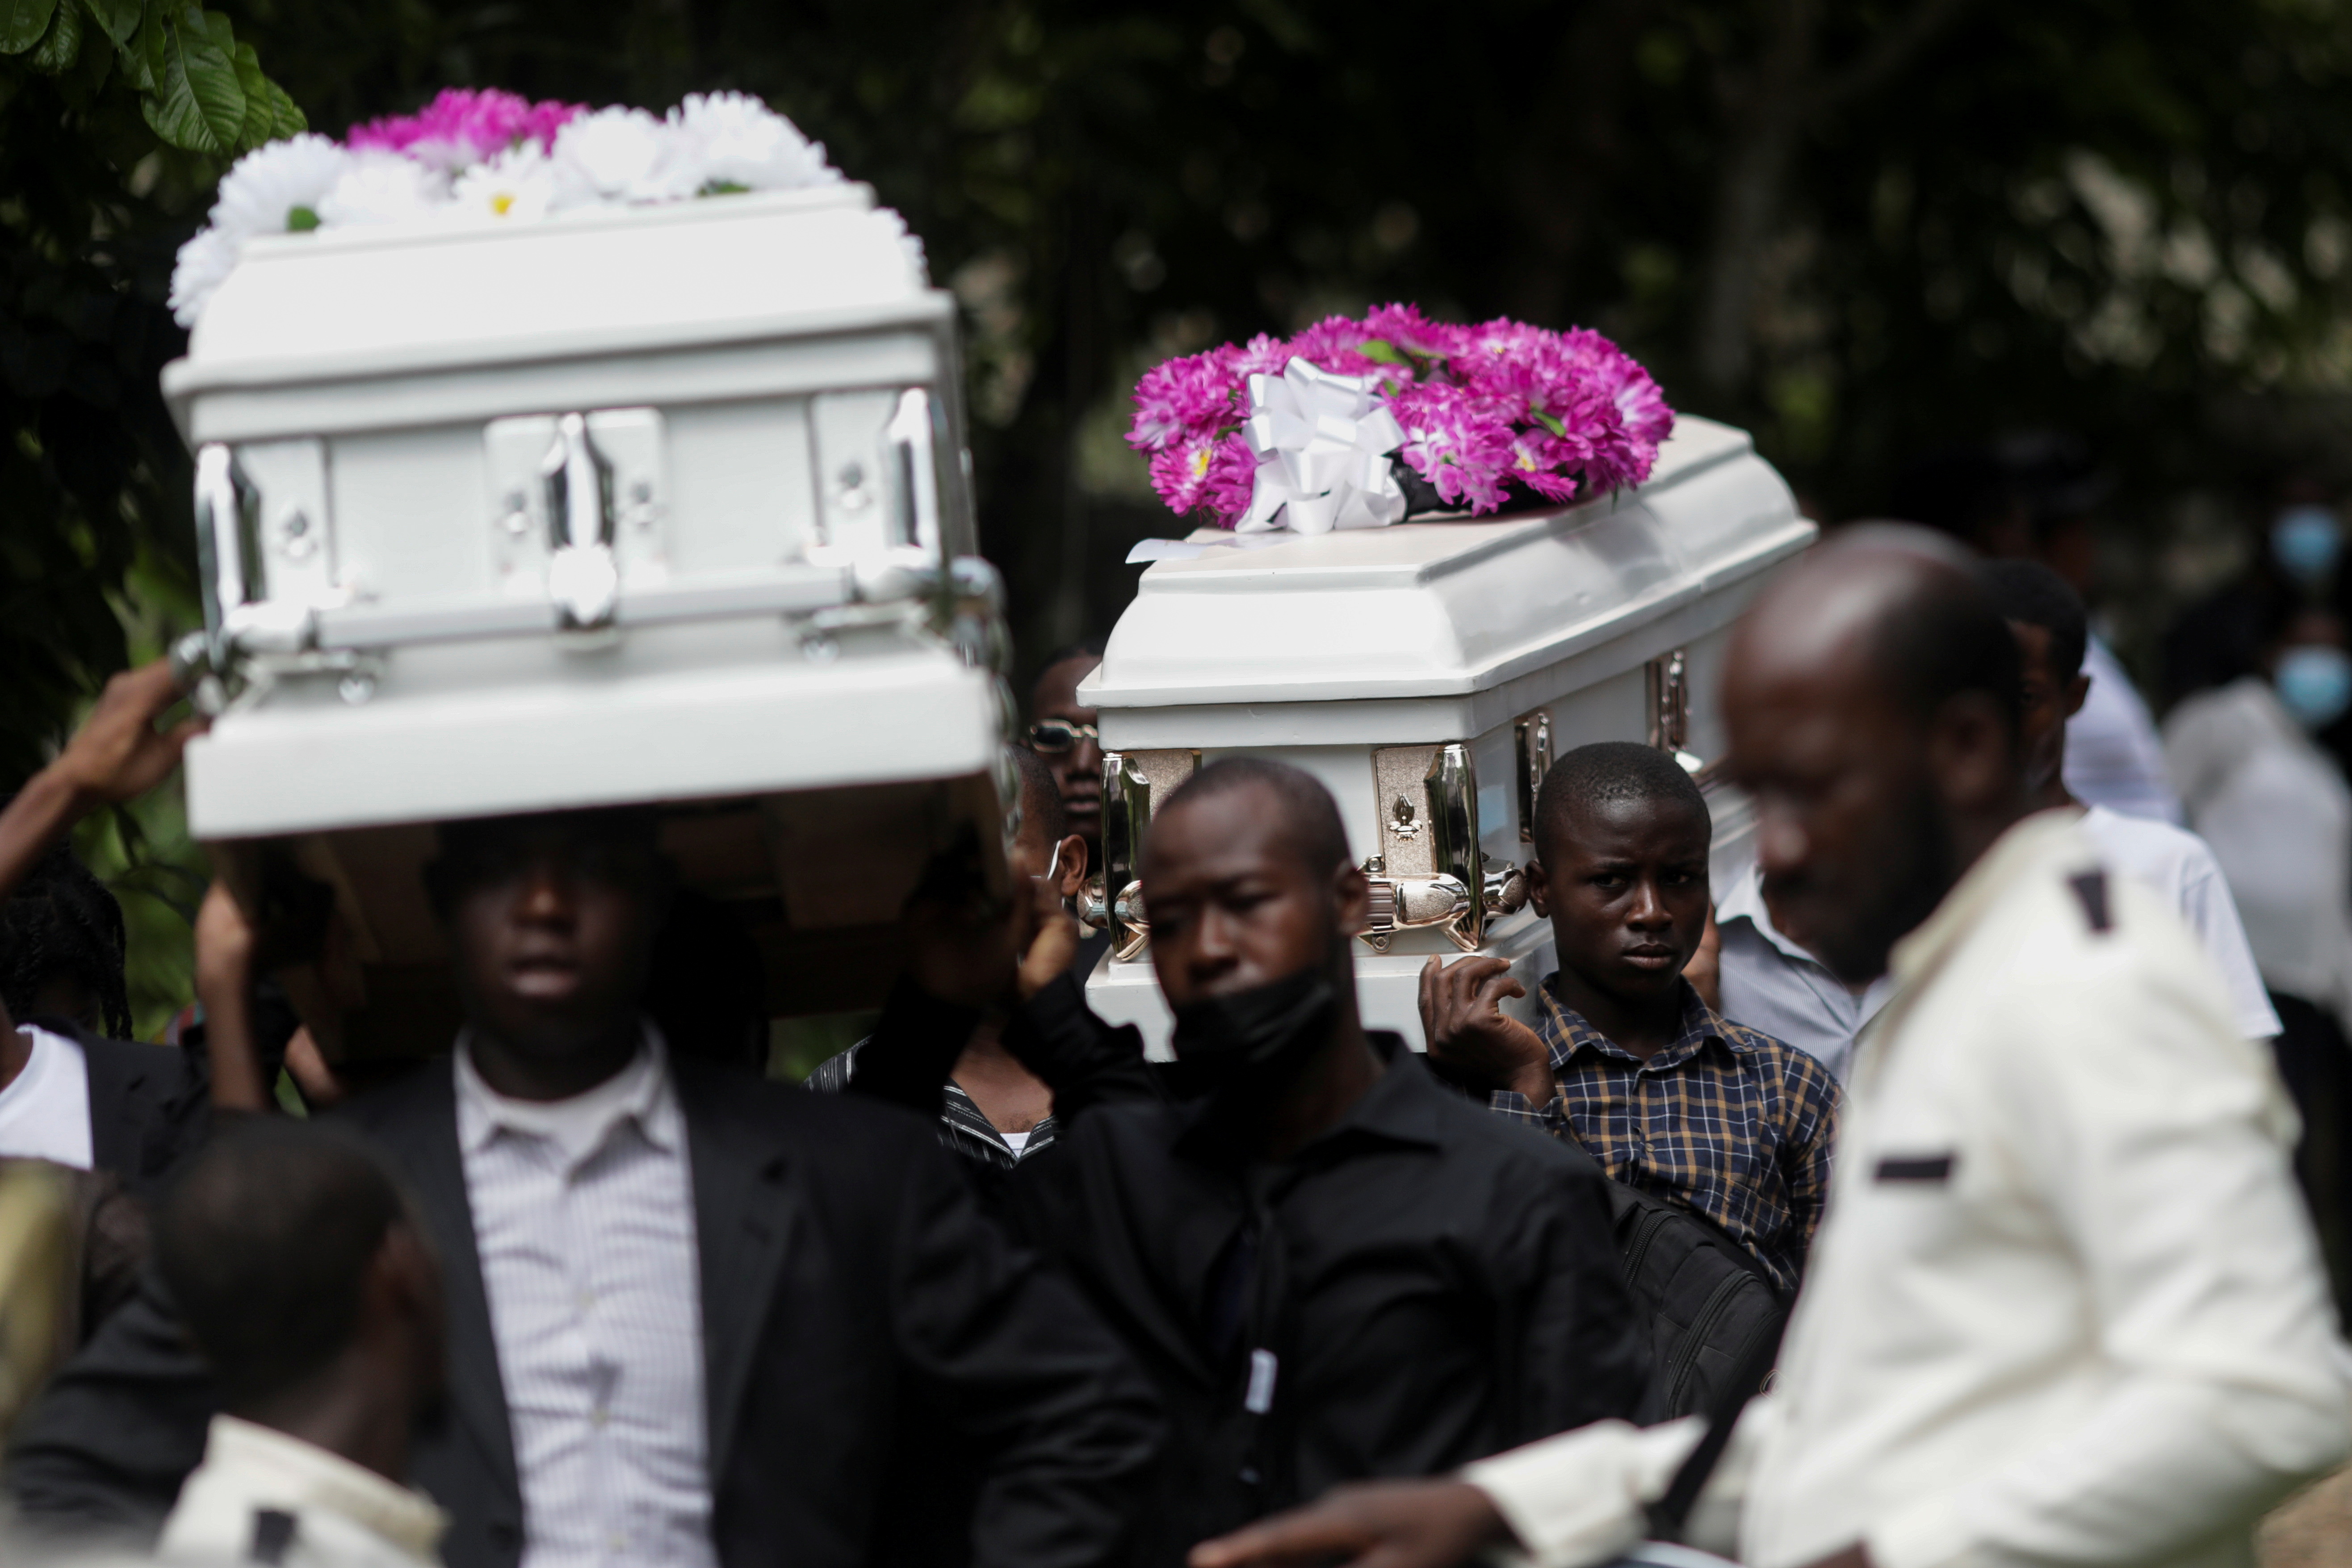 How to Avoid Crying at a Funeral. Tips for delaying your tears